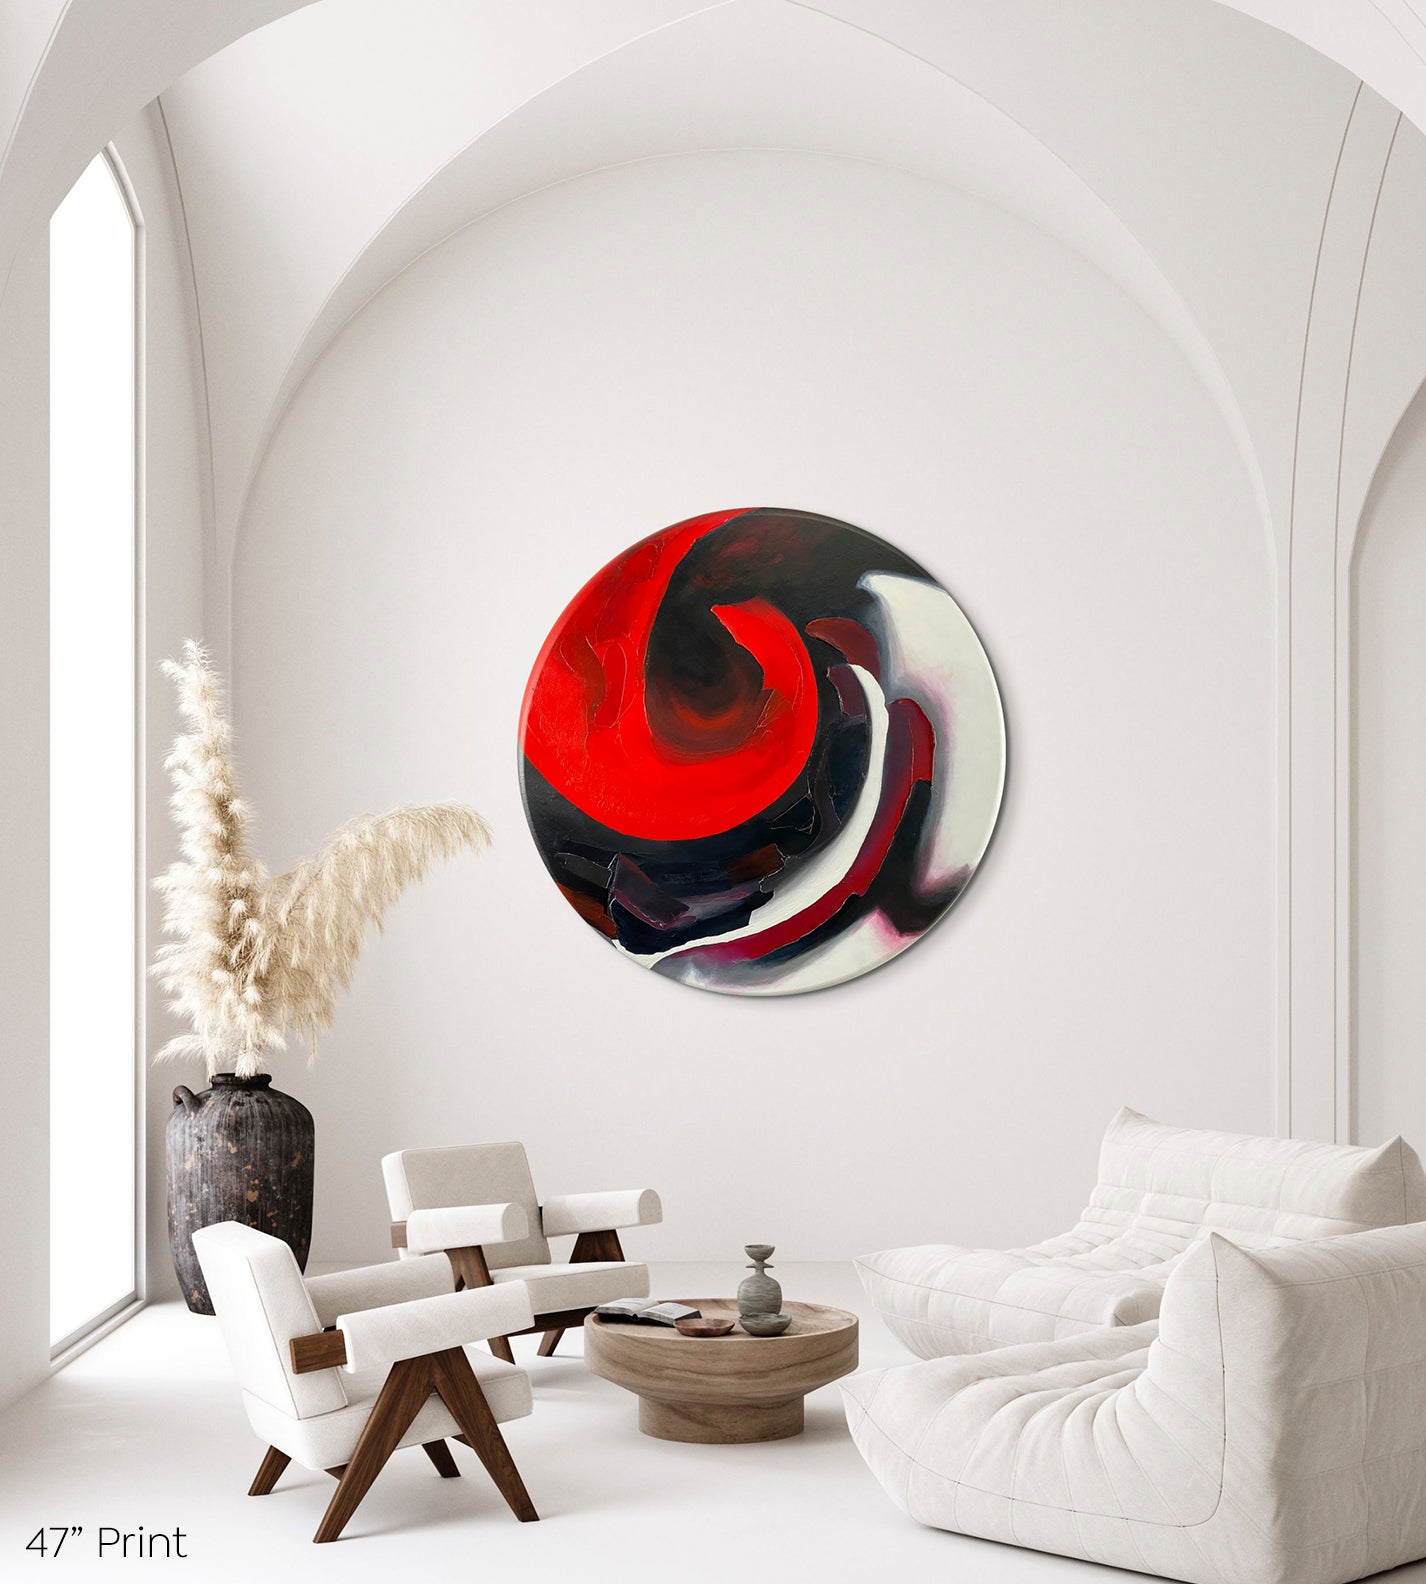 Abstract, acrylic and mixed-media 47” print on a round canvas with curved-edges shown on a white wall in a contemporary living room with arches above.